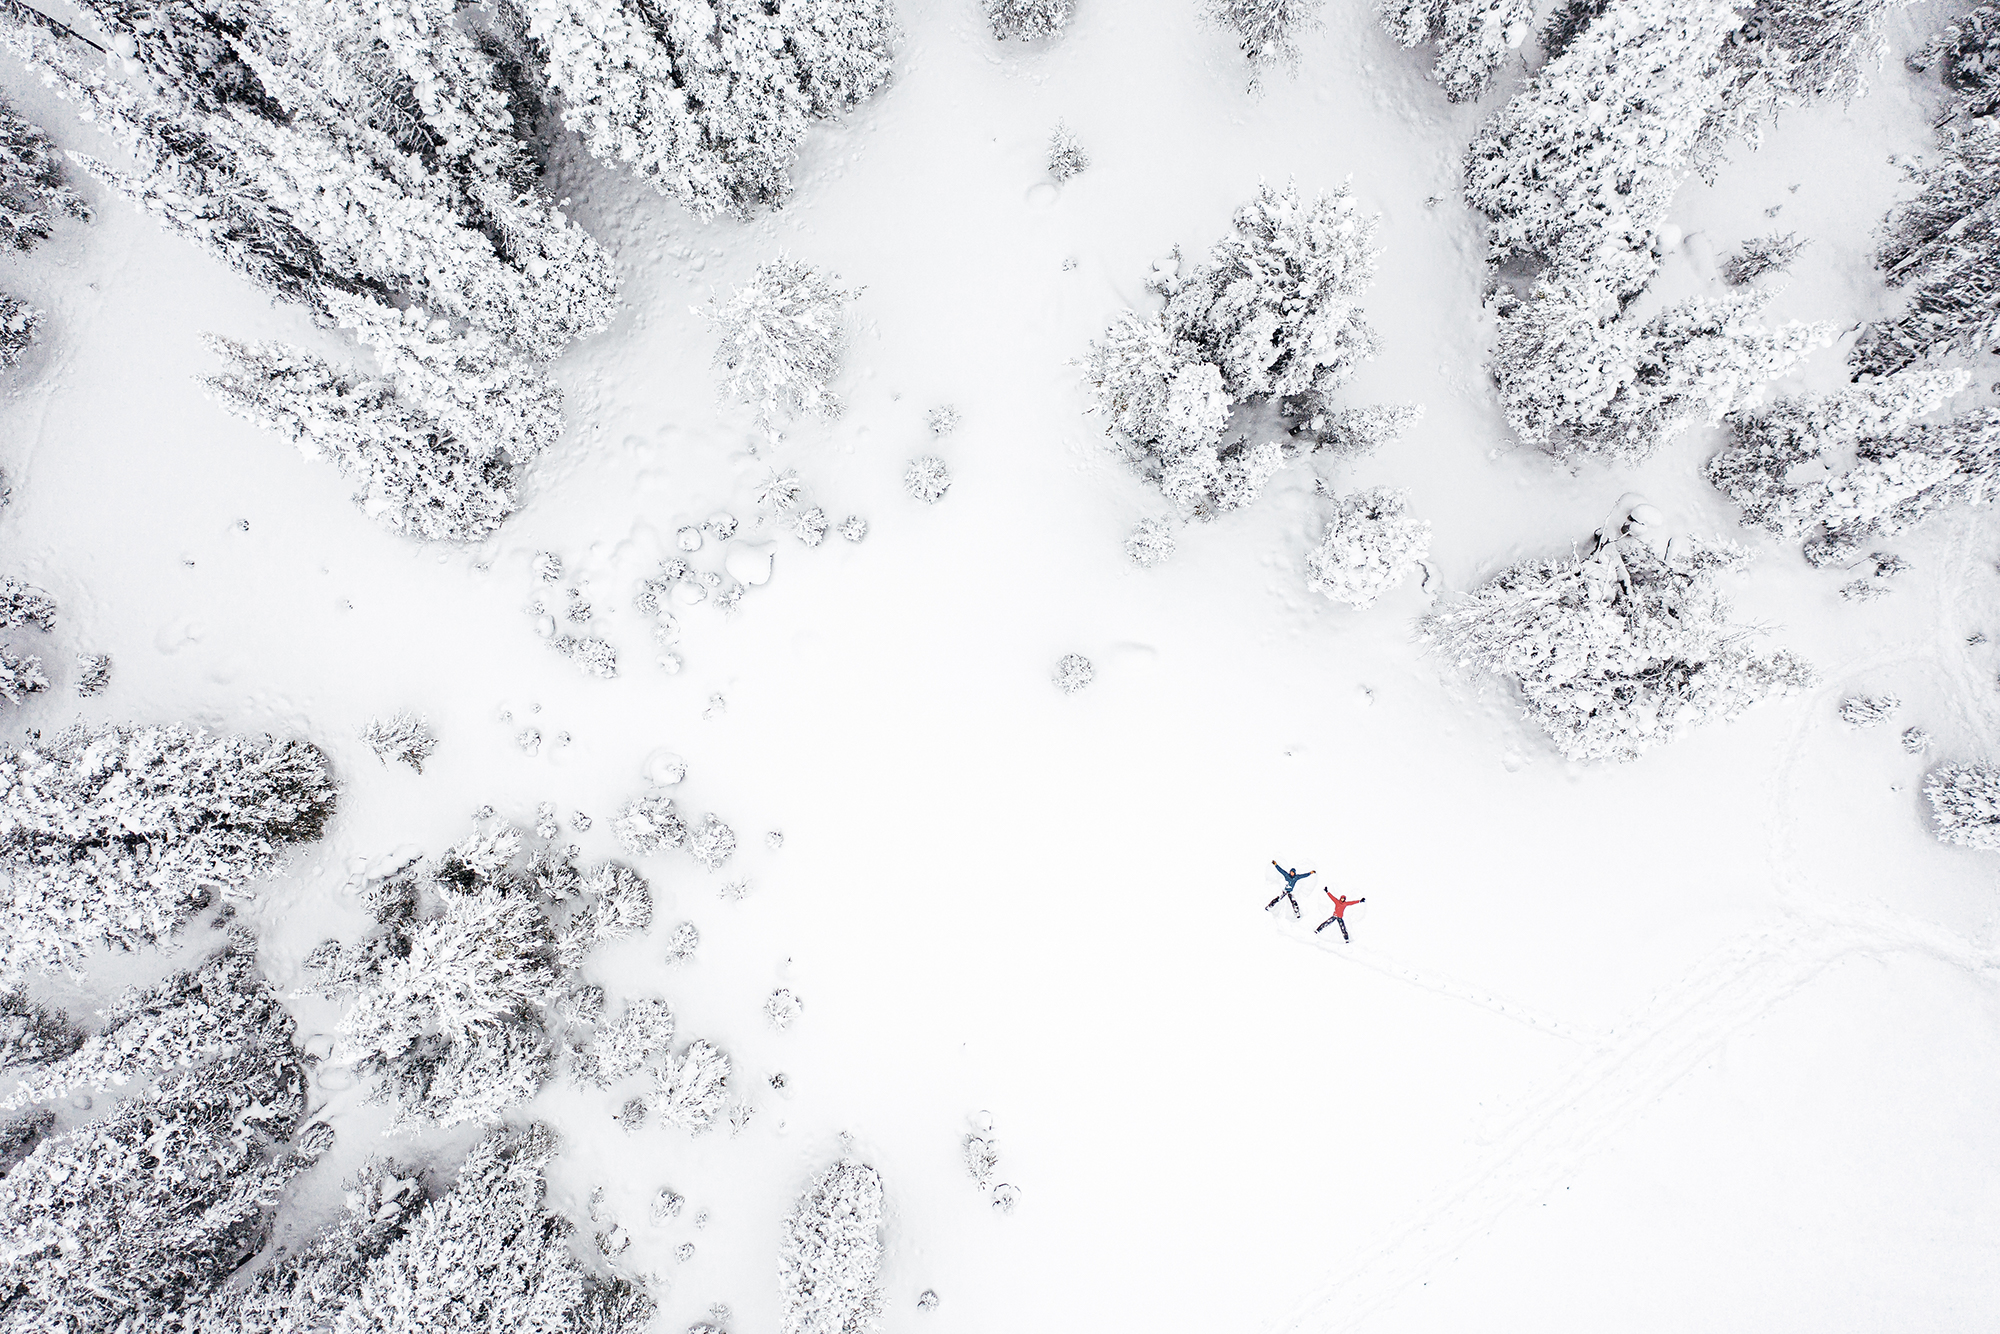 Two people making snow angels in the forest during wintertime